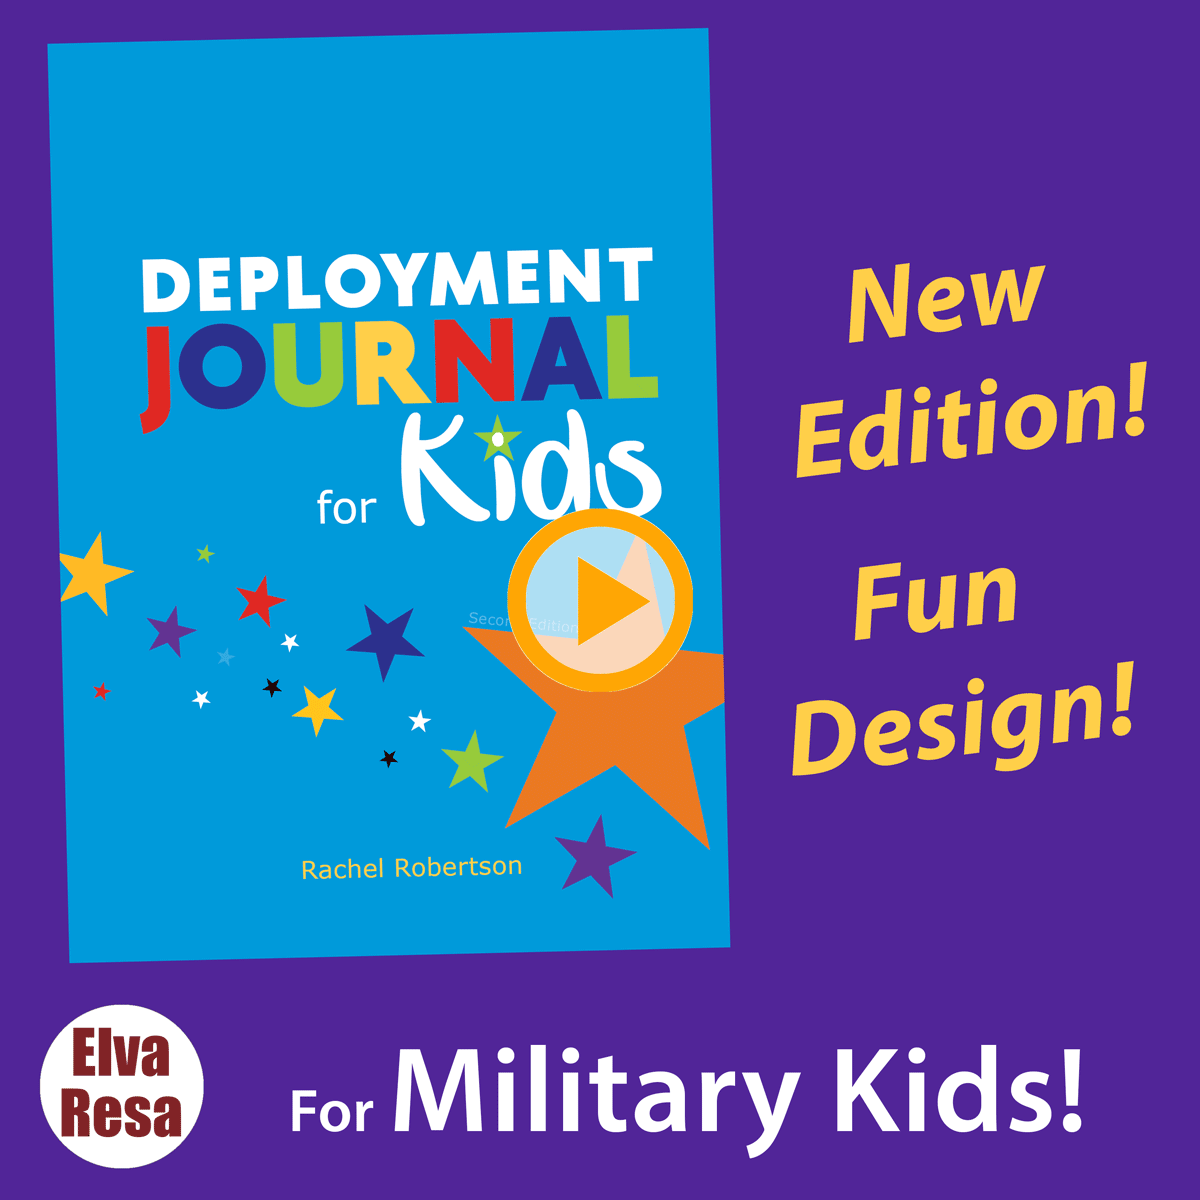 Deployment Journal for Kids 2nd edition by Rachel Robertson, published by Elva Resa Publishing - Look Inside video